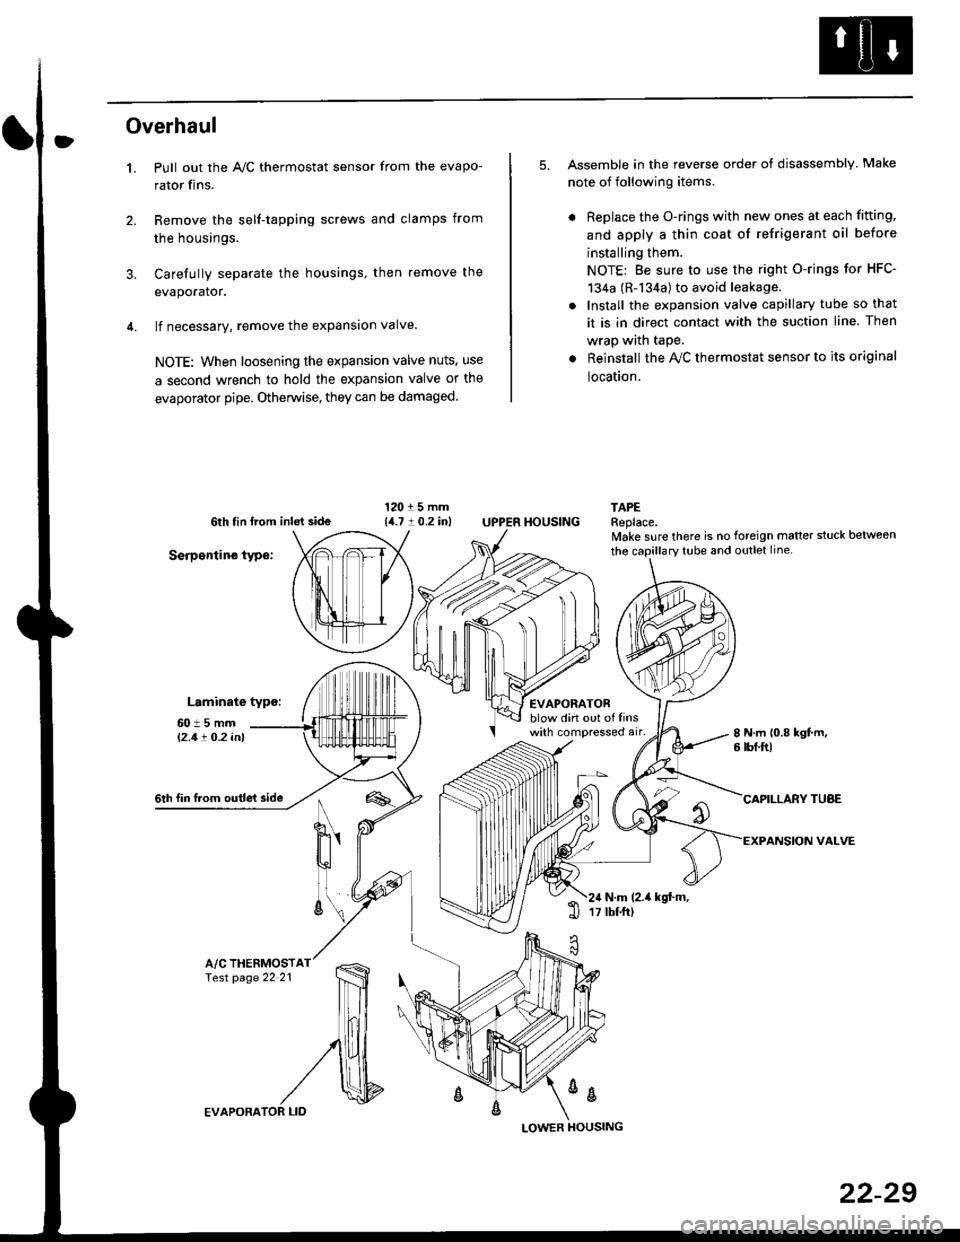 HONDA CIVIC 1998 6.G Service Manual Overhaul
1.
3.
Pull out the A,/C thermostat sensor from the evapo-
rator fins.
Remove the self-tapping screws and clamps from
the housings.
Carefully separate the housings, then remove the
evaporator.